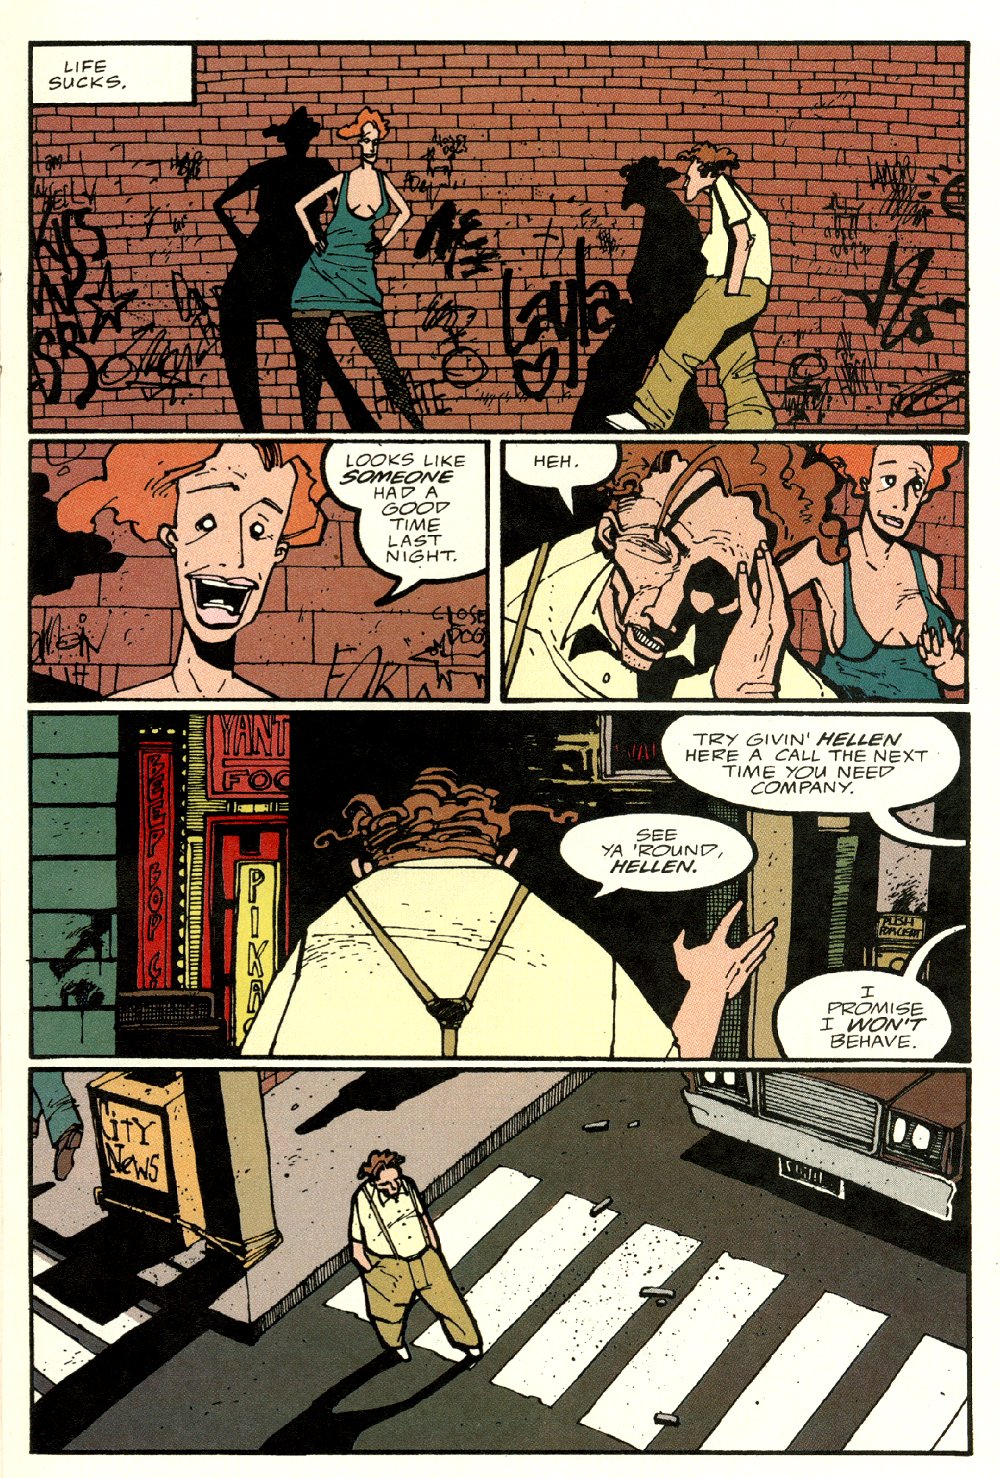 Read online Ted McKeever's Metropol comic -  Issue #3 - 15